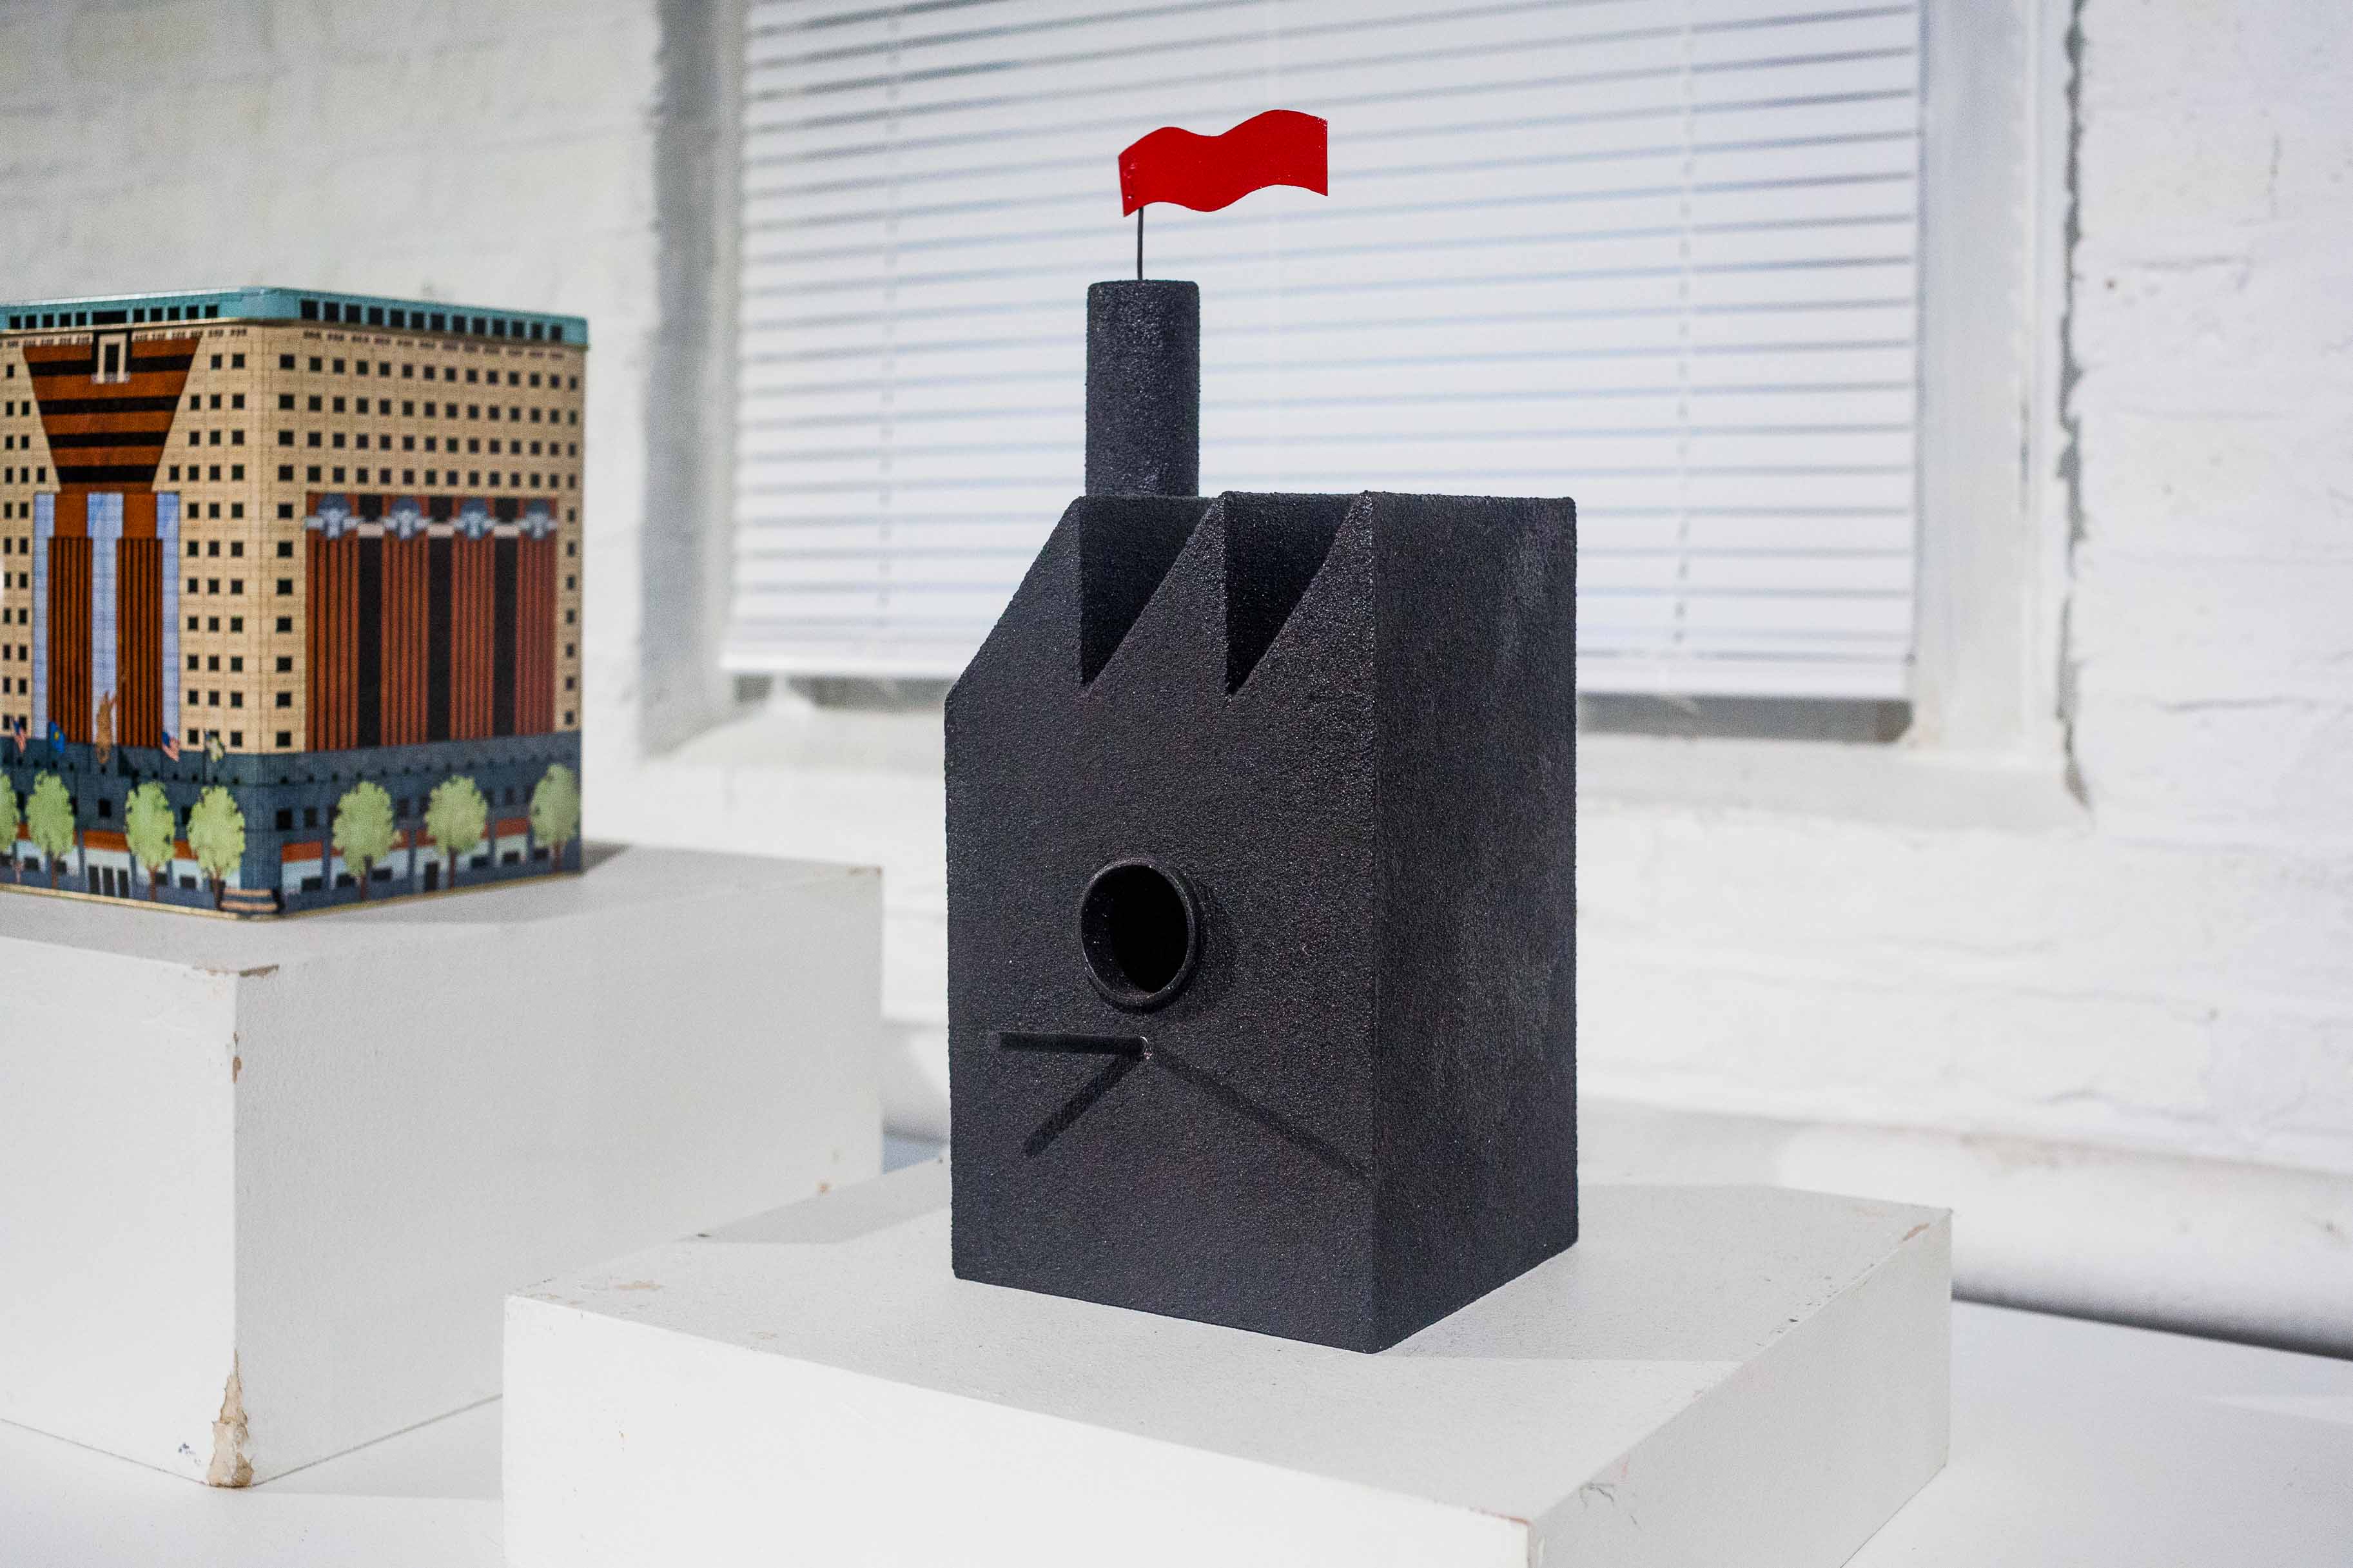 JR SARGENTI, FACTORY BIRDHOUSE, SIGNED PIECE UNIQUE, HANDMADE FROM RECYCLING MATERIAL, 2020 USA